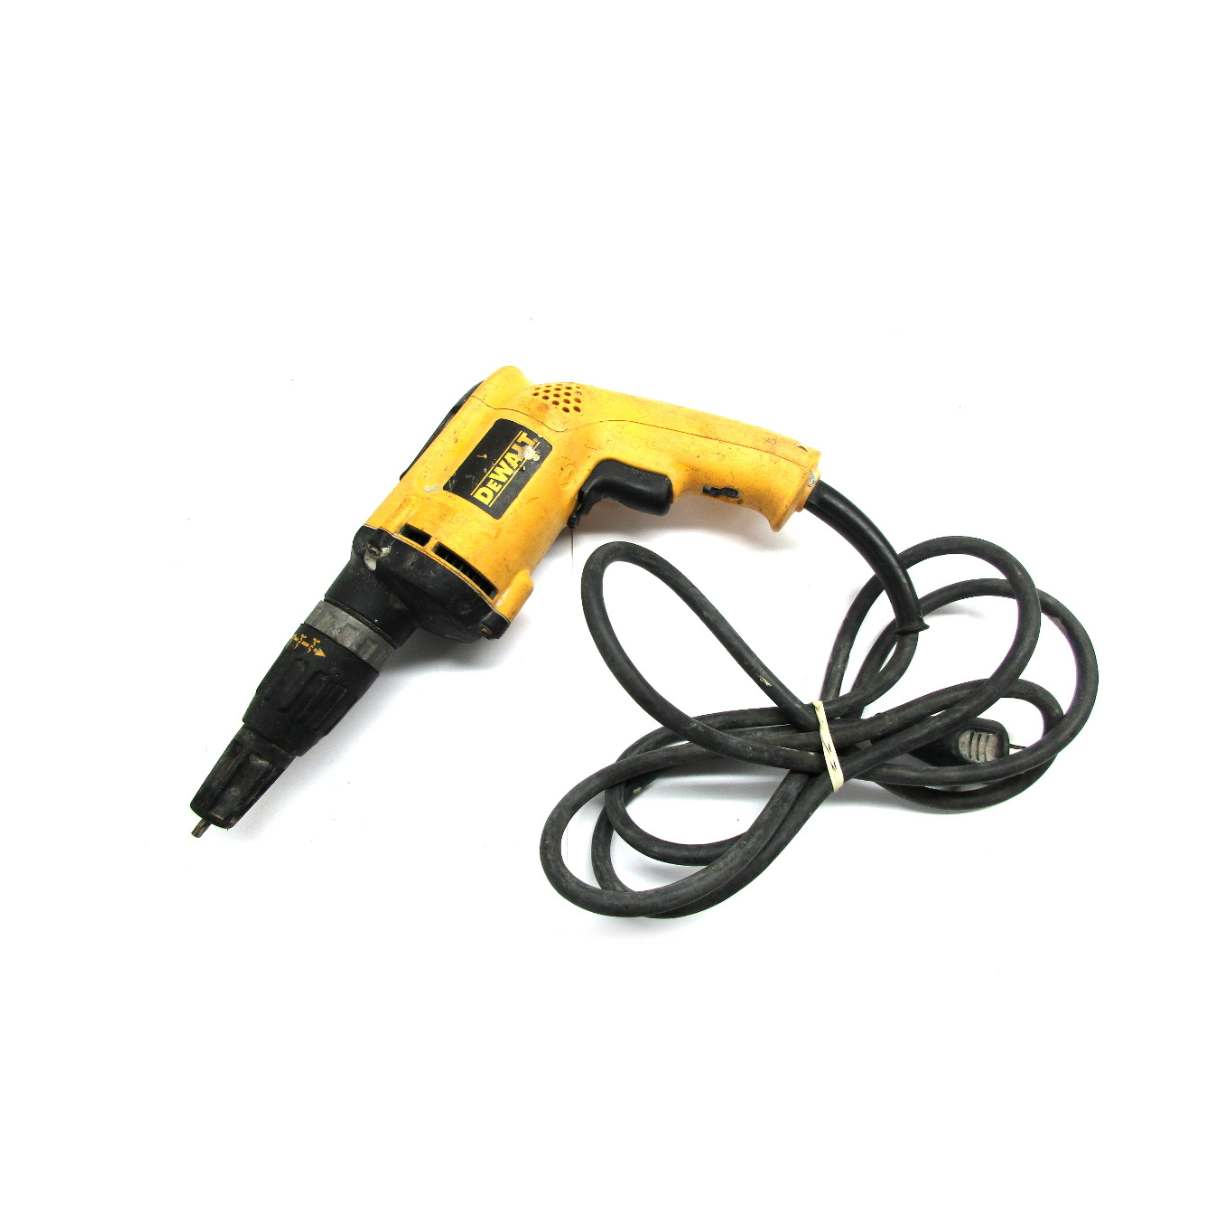 Safety Precautions When Using Power Tools With Electrical Cords